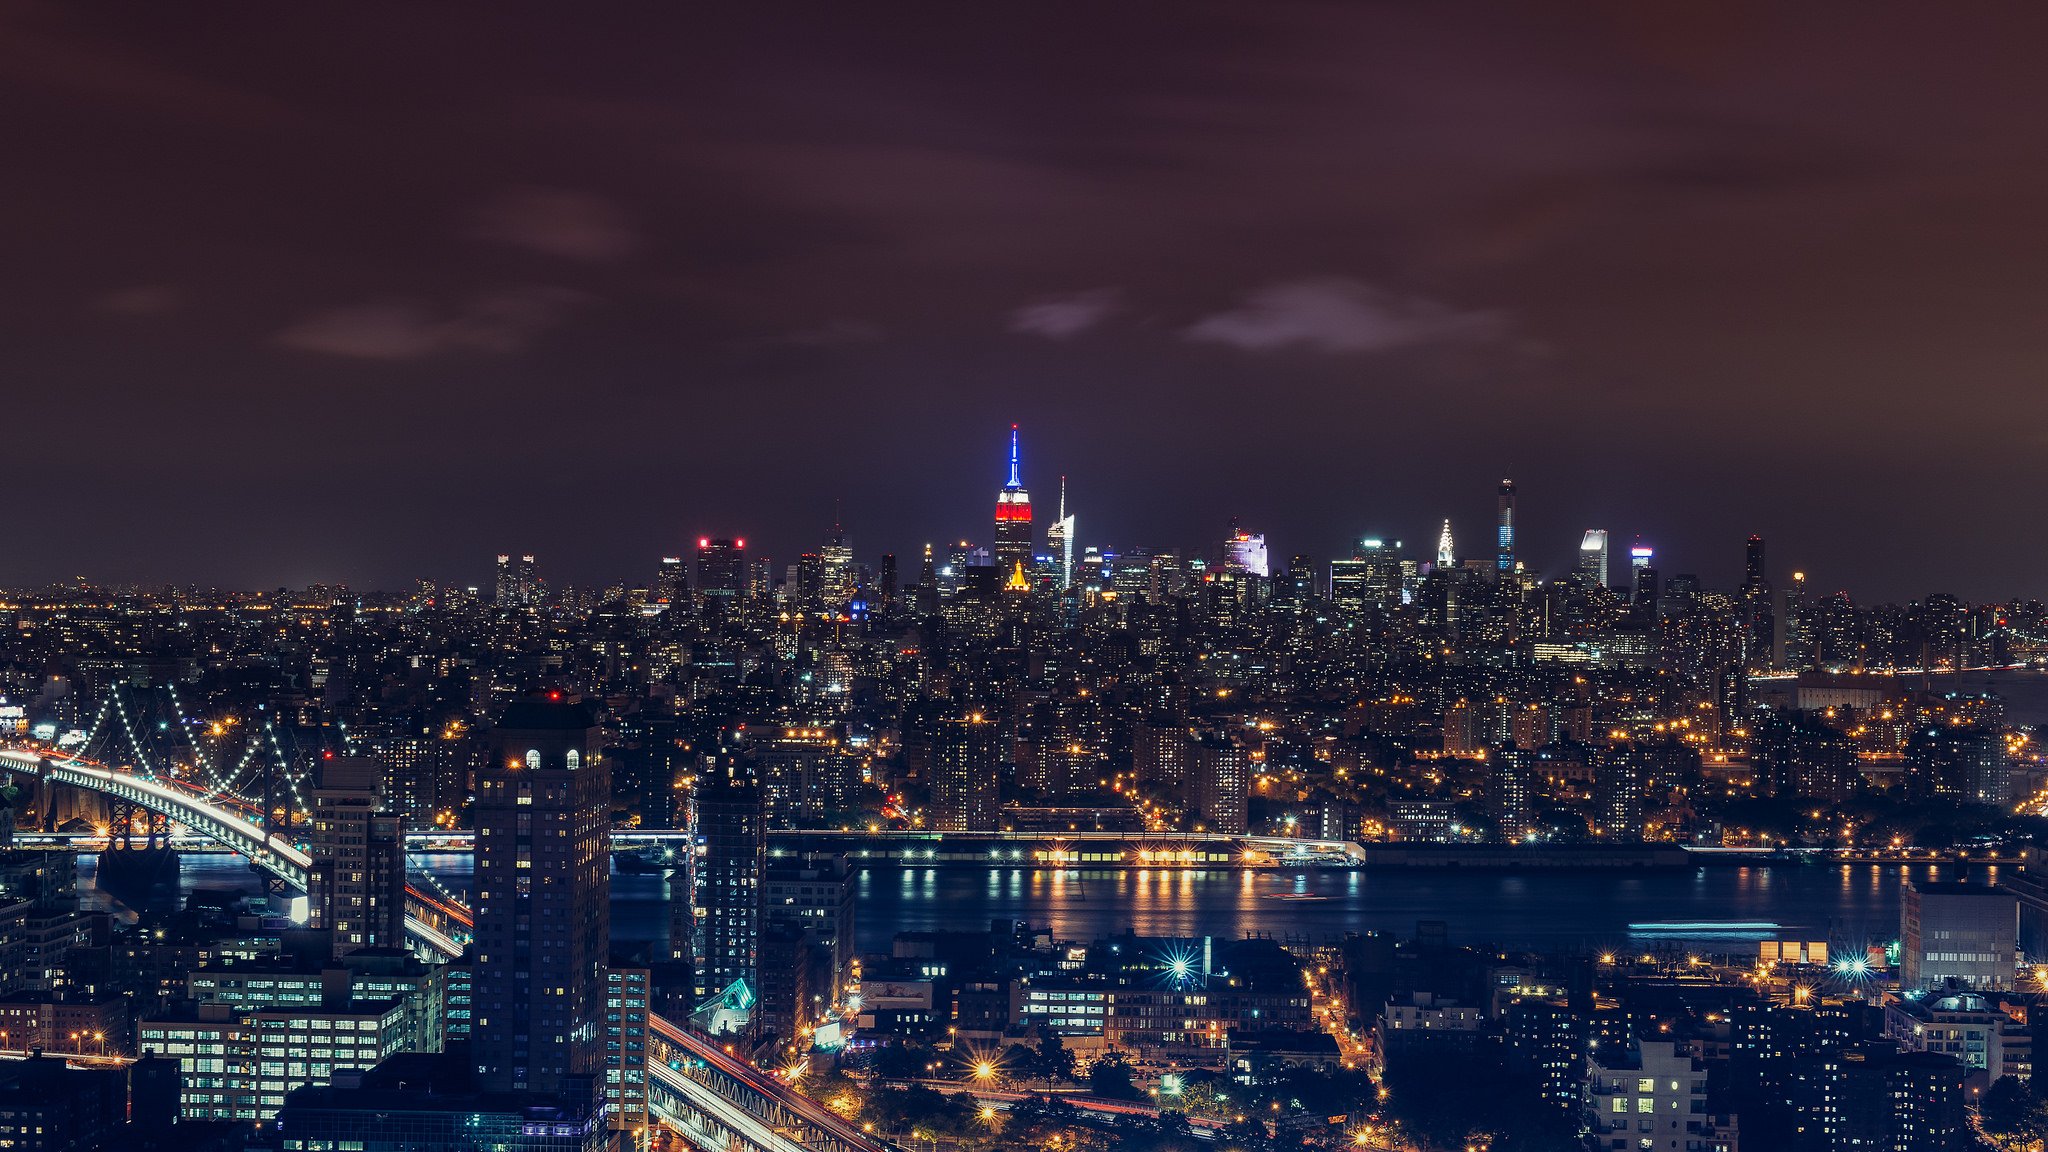 architecture, Buildings, Cities, Cityscape, Contrast, Empire, Lights, Night, Panorama, Place, Rivers, Scenic, Shift, Skyline, Skyscrapers, State, Tilt, View, Water, Window, World, New york, Nyc, Bridge, Brooklyn Wallpaper